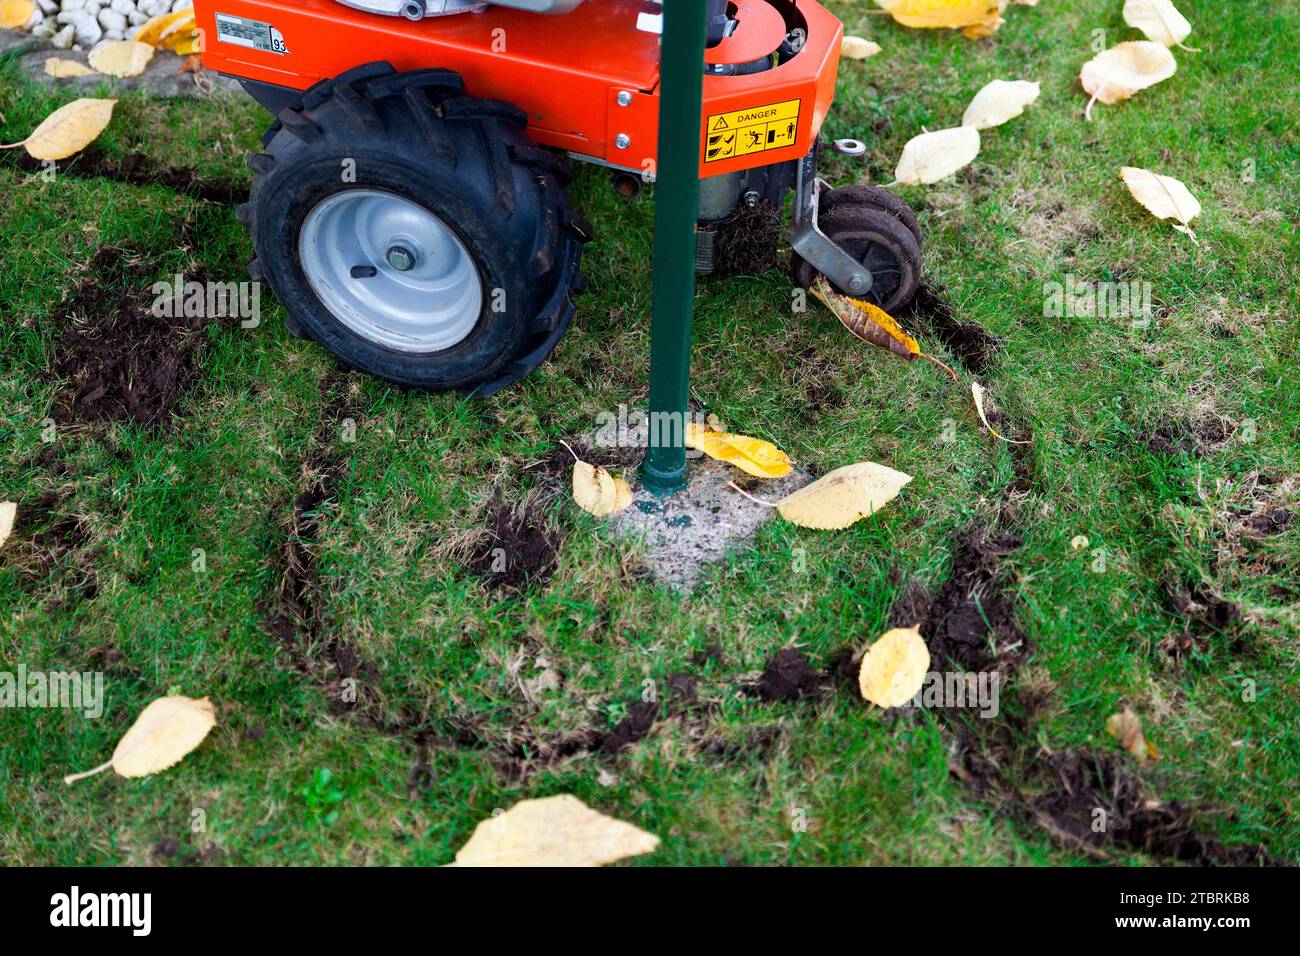 Laying track, cables for robot lawn mowers Stock Photo